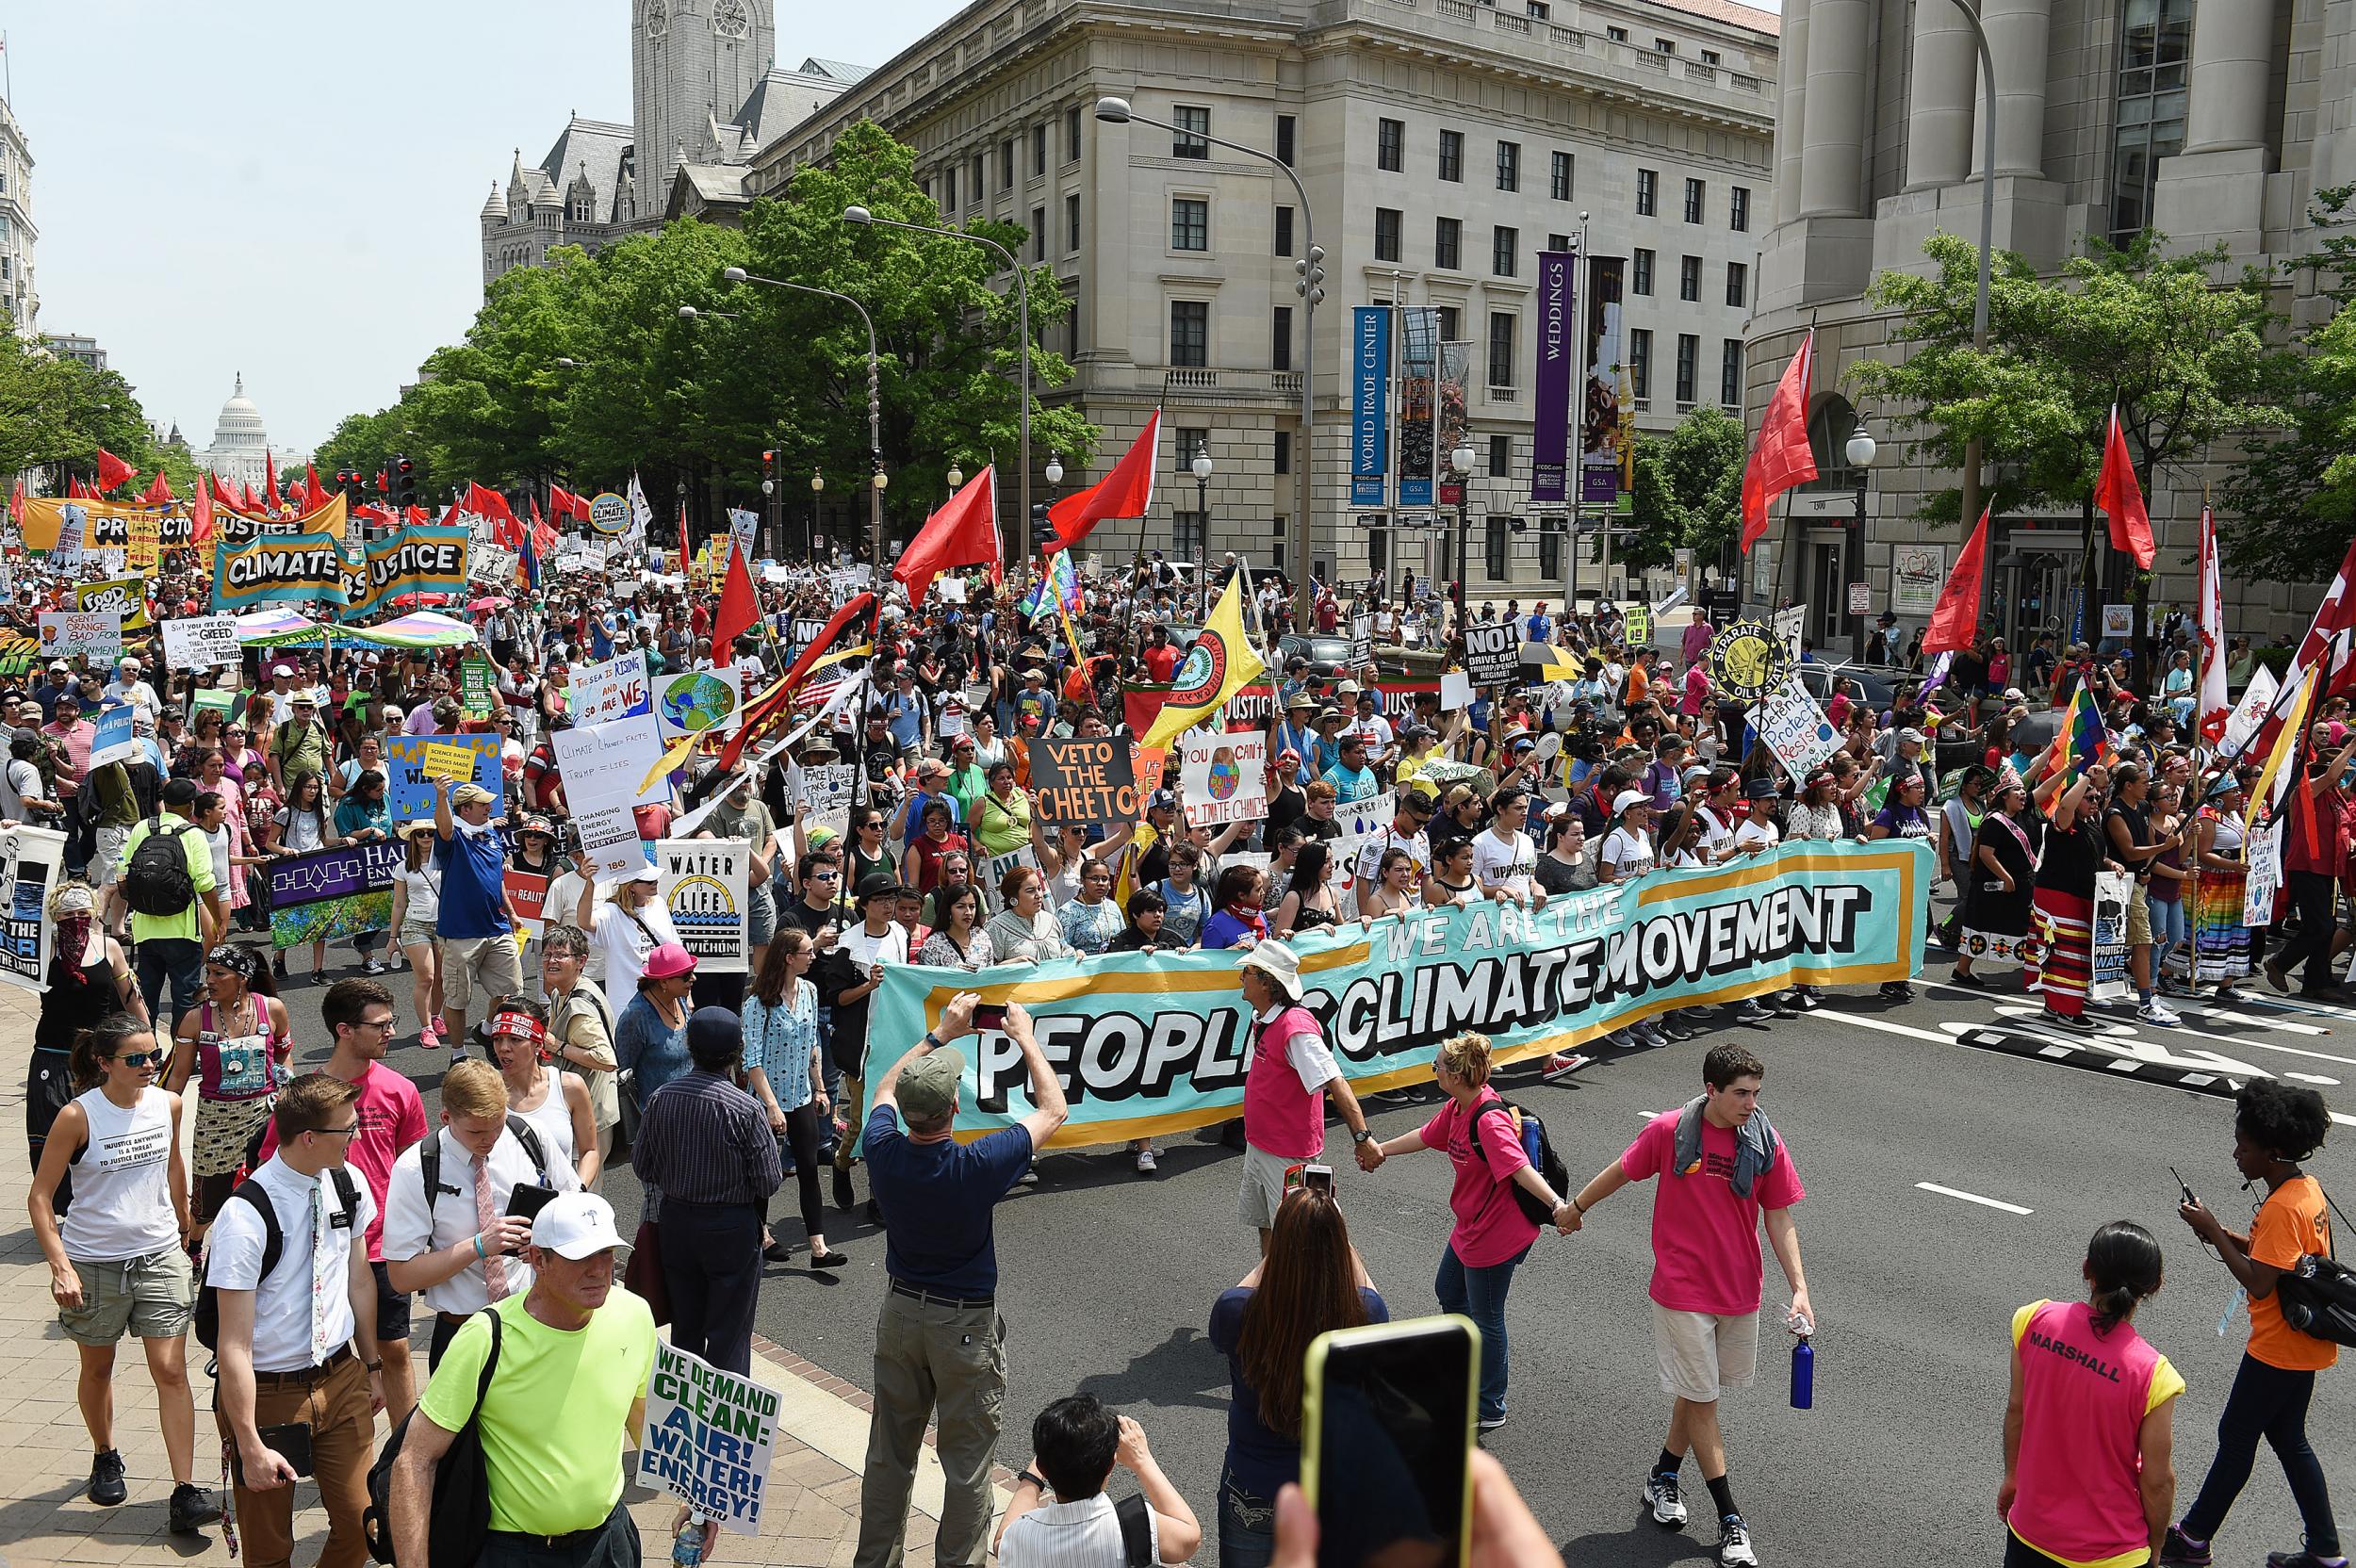 Thousands marched in the capital and across the US, demanding a clean environment